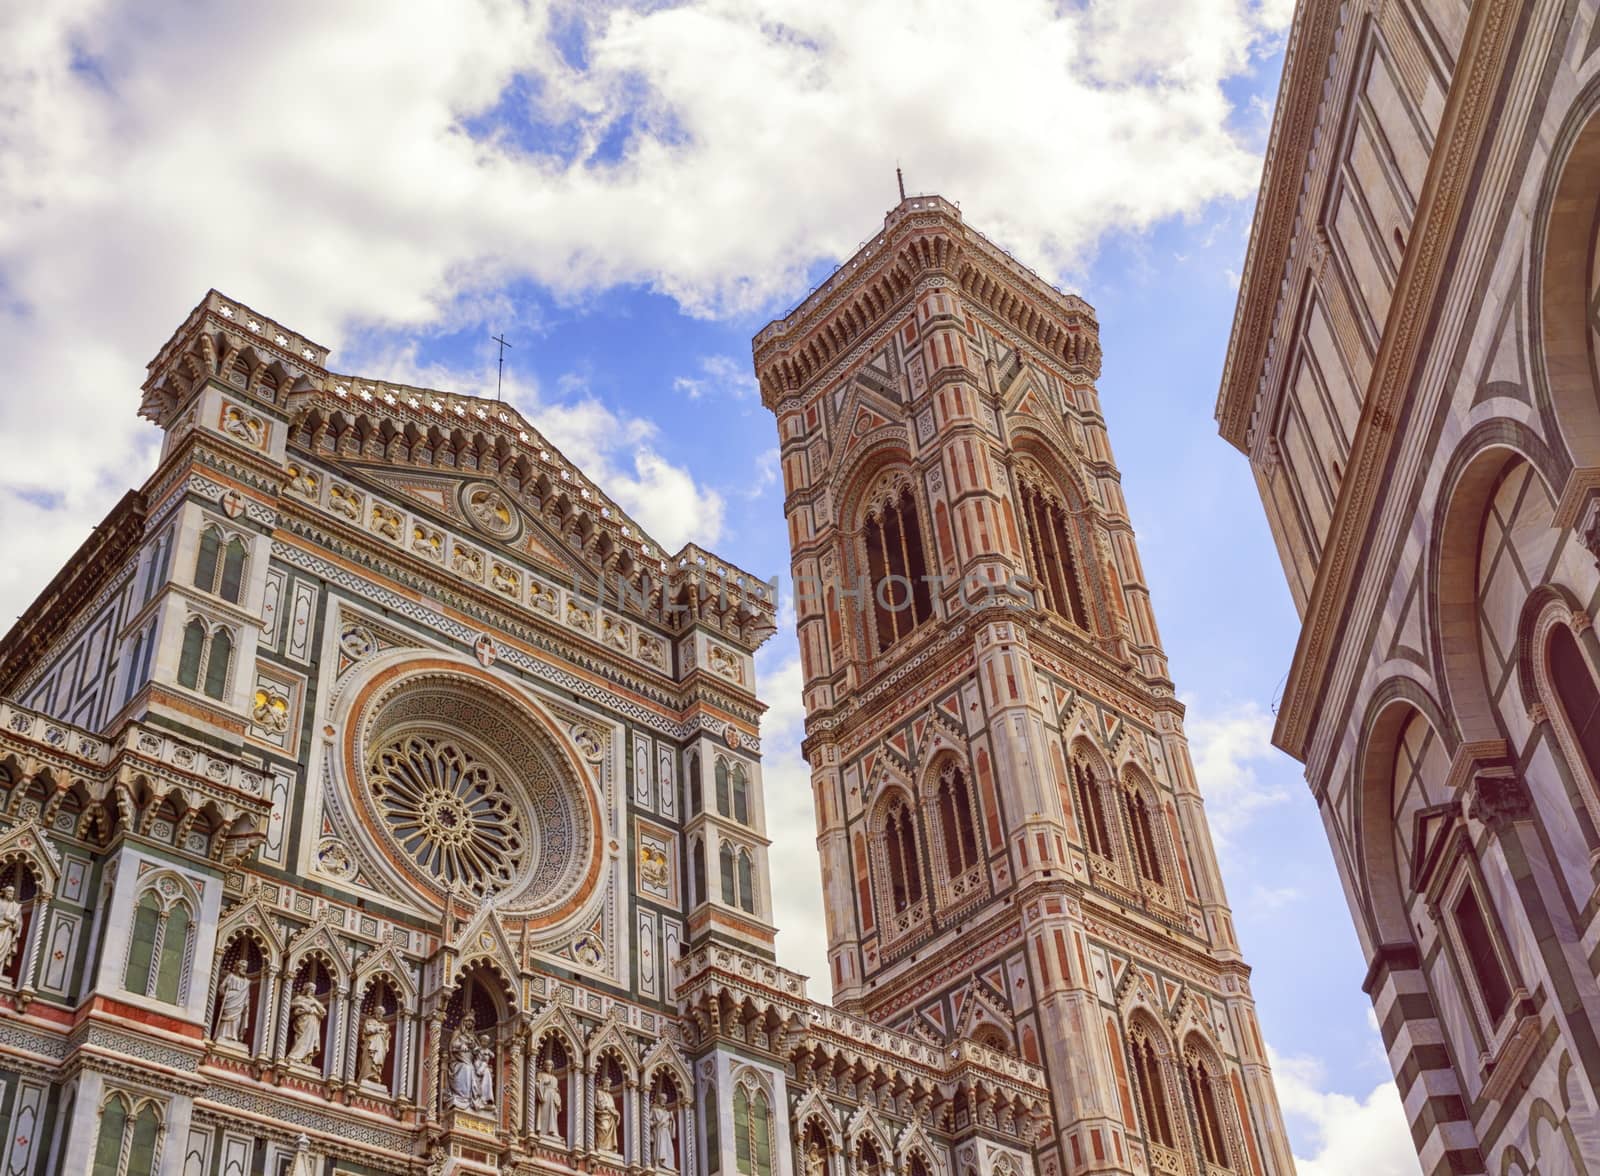 Giotto's bell tower and Cathedral Santa Maria del Fiore, Duomo, by day in Florence, Tuscany, Italy